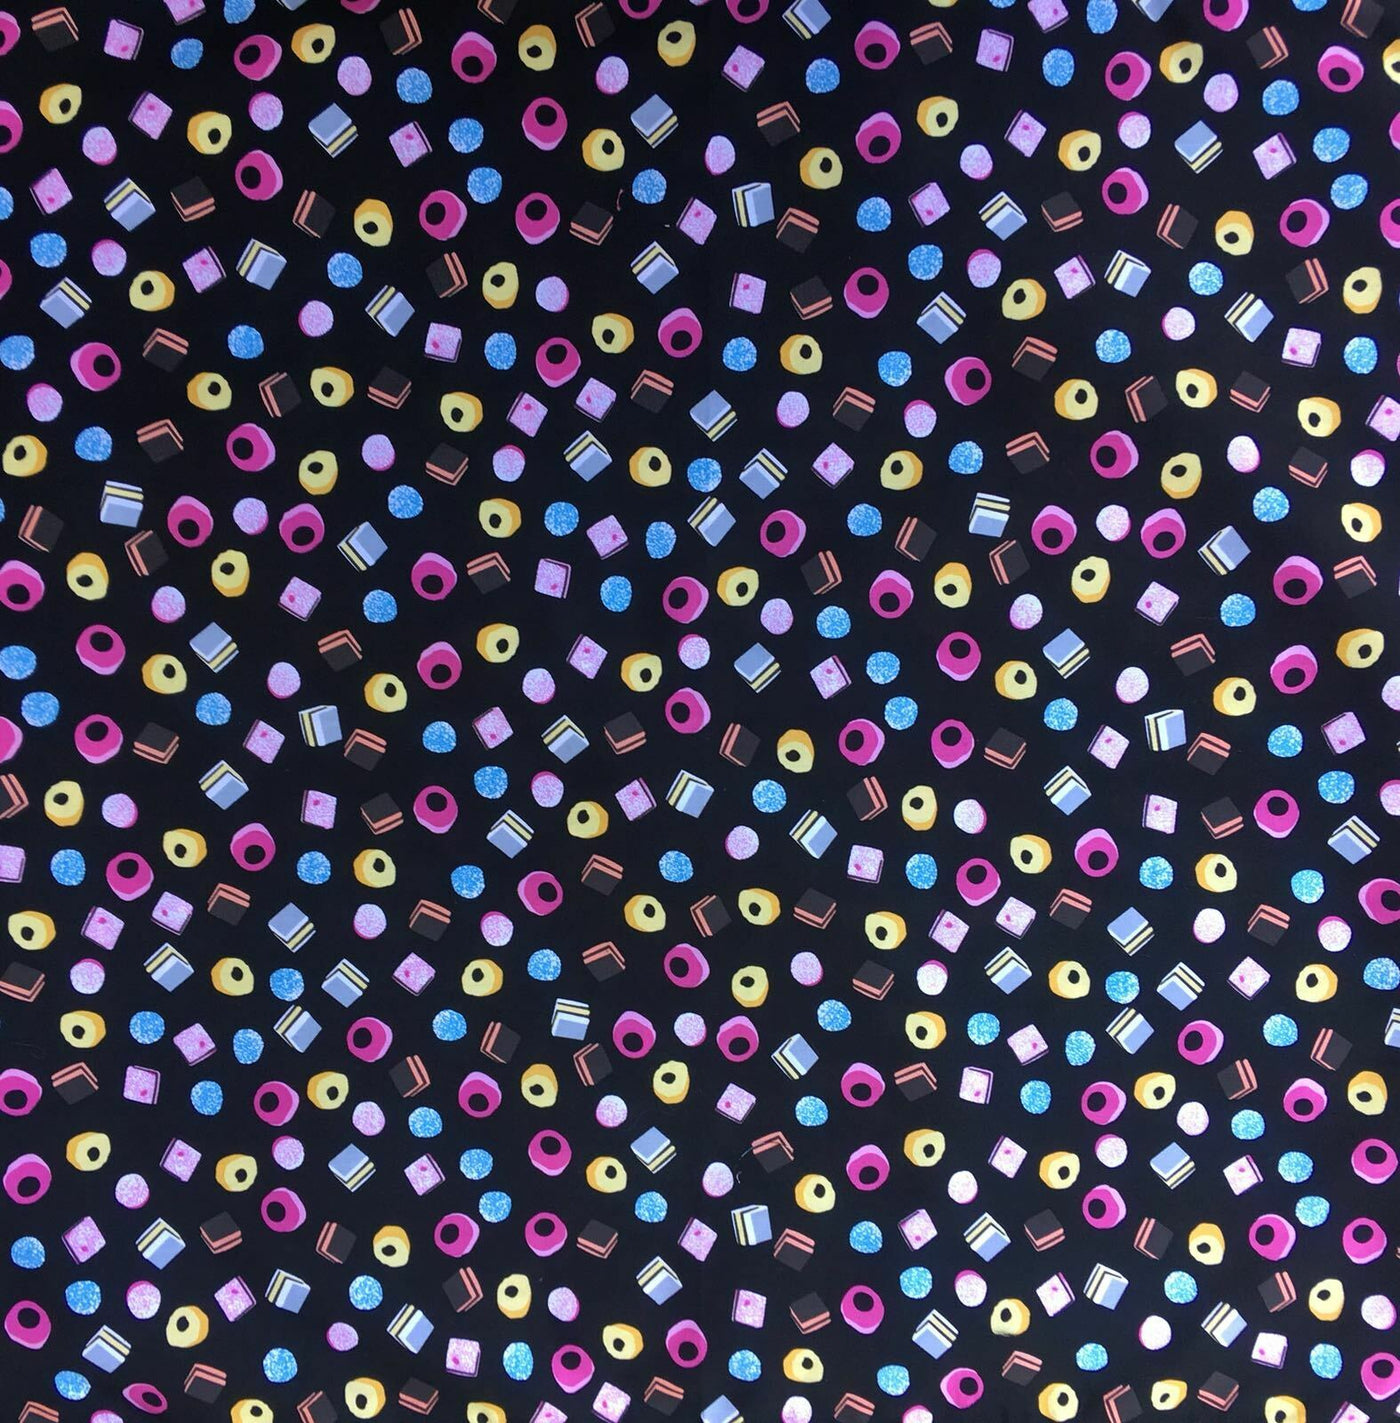 Liquorice All Sorts Sweets Craft Cotton 100% Cotton Fabric Ideal for Face Masks